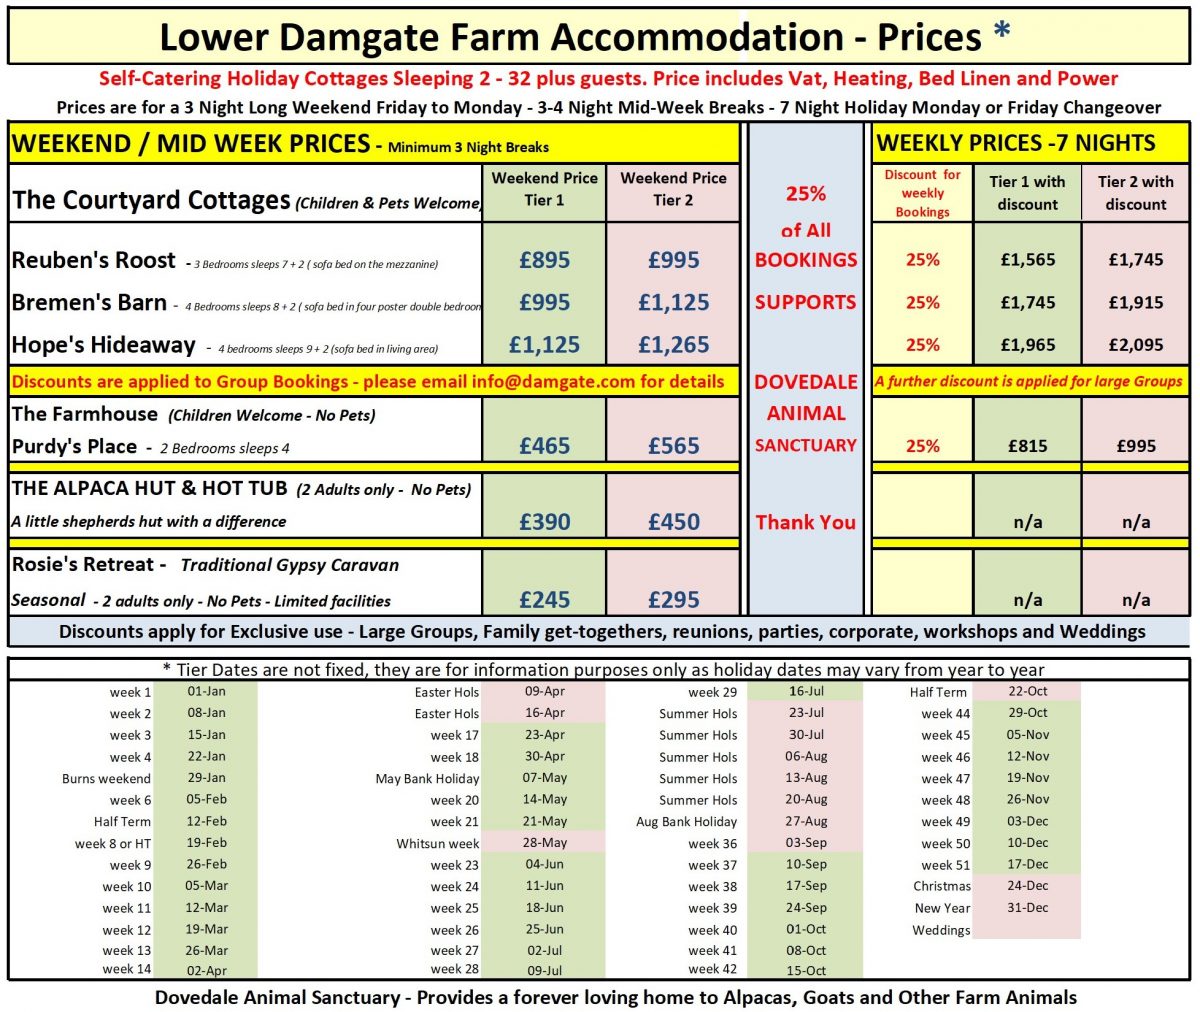 Prices for Lower Damgate Farm Holiday Accommodation